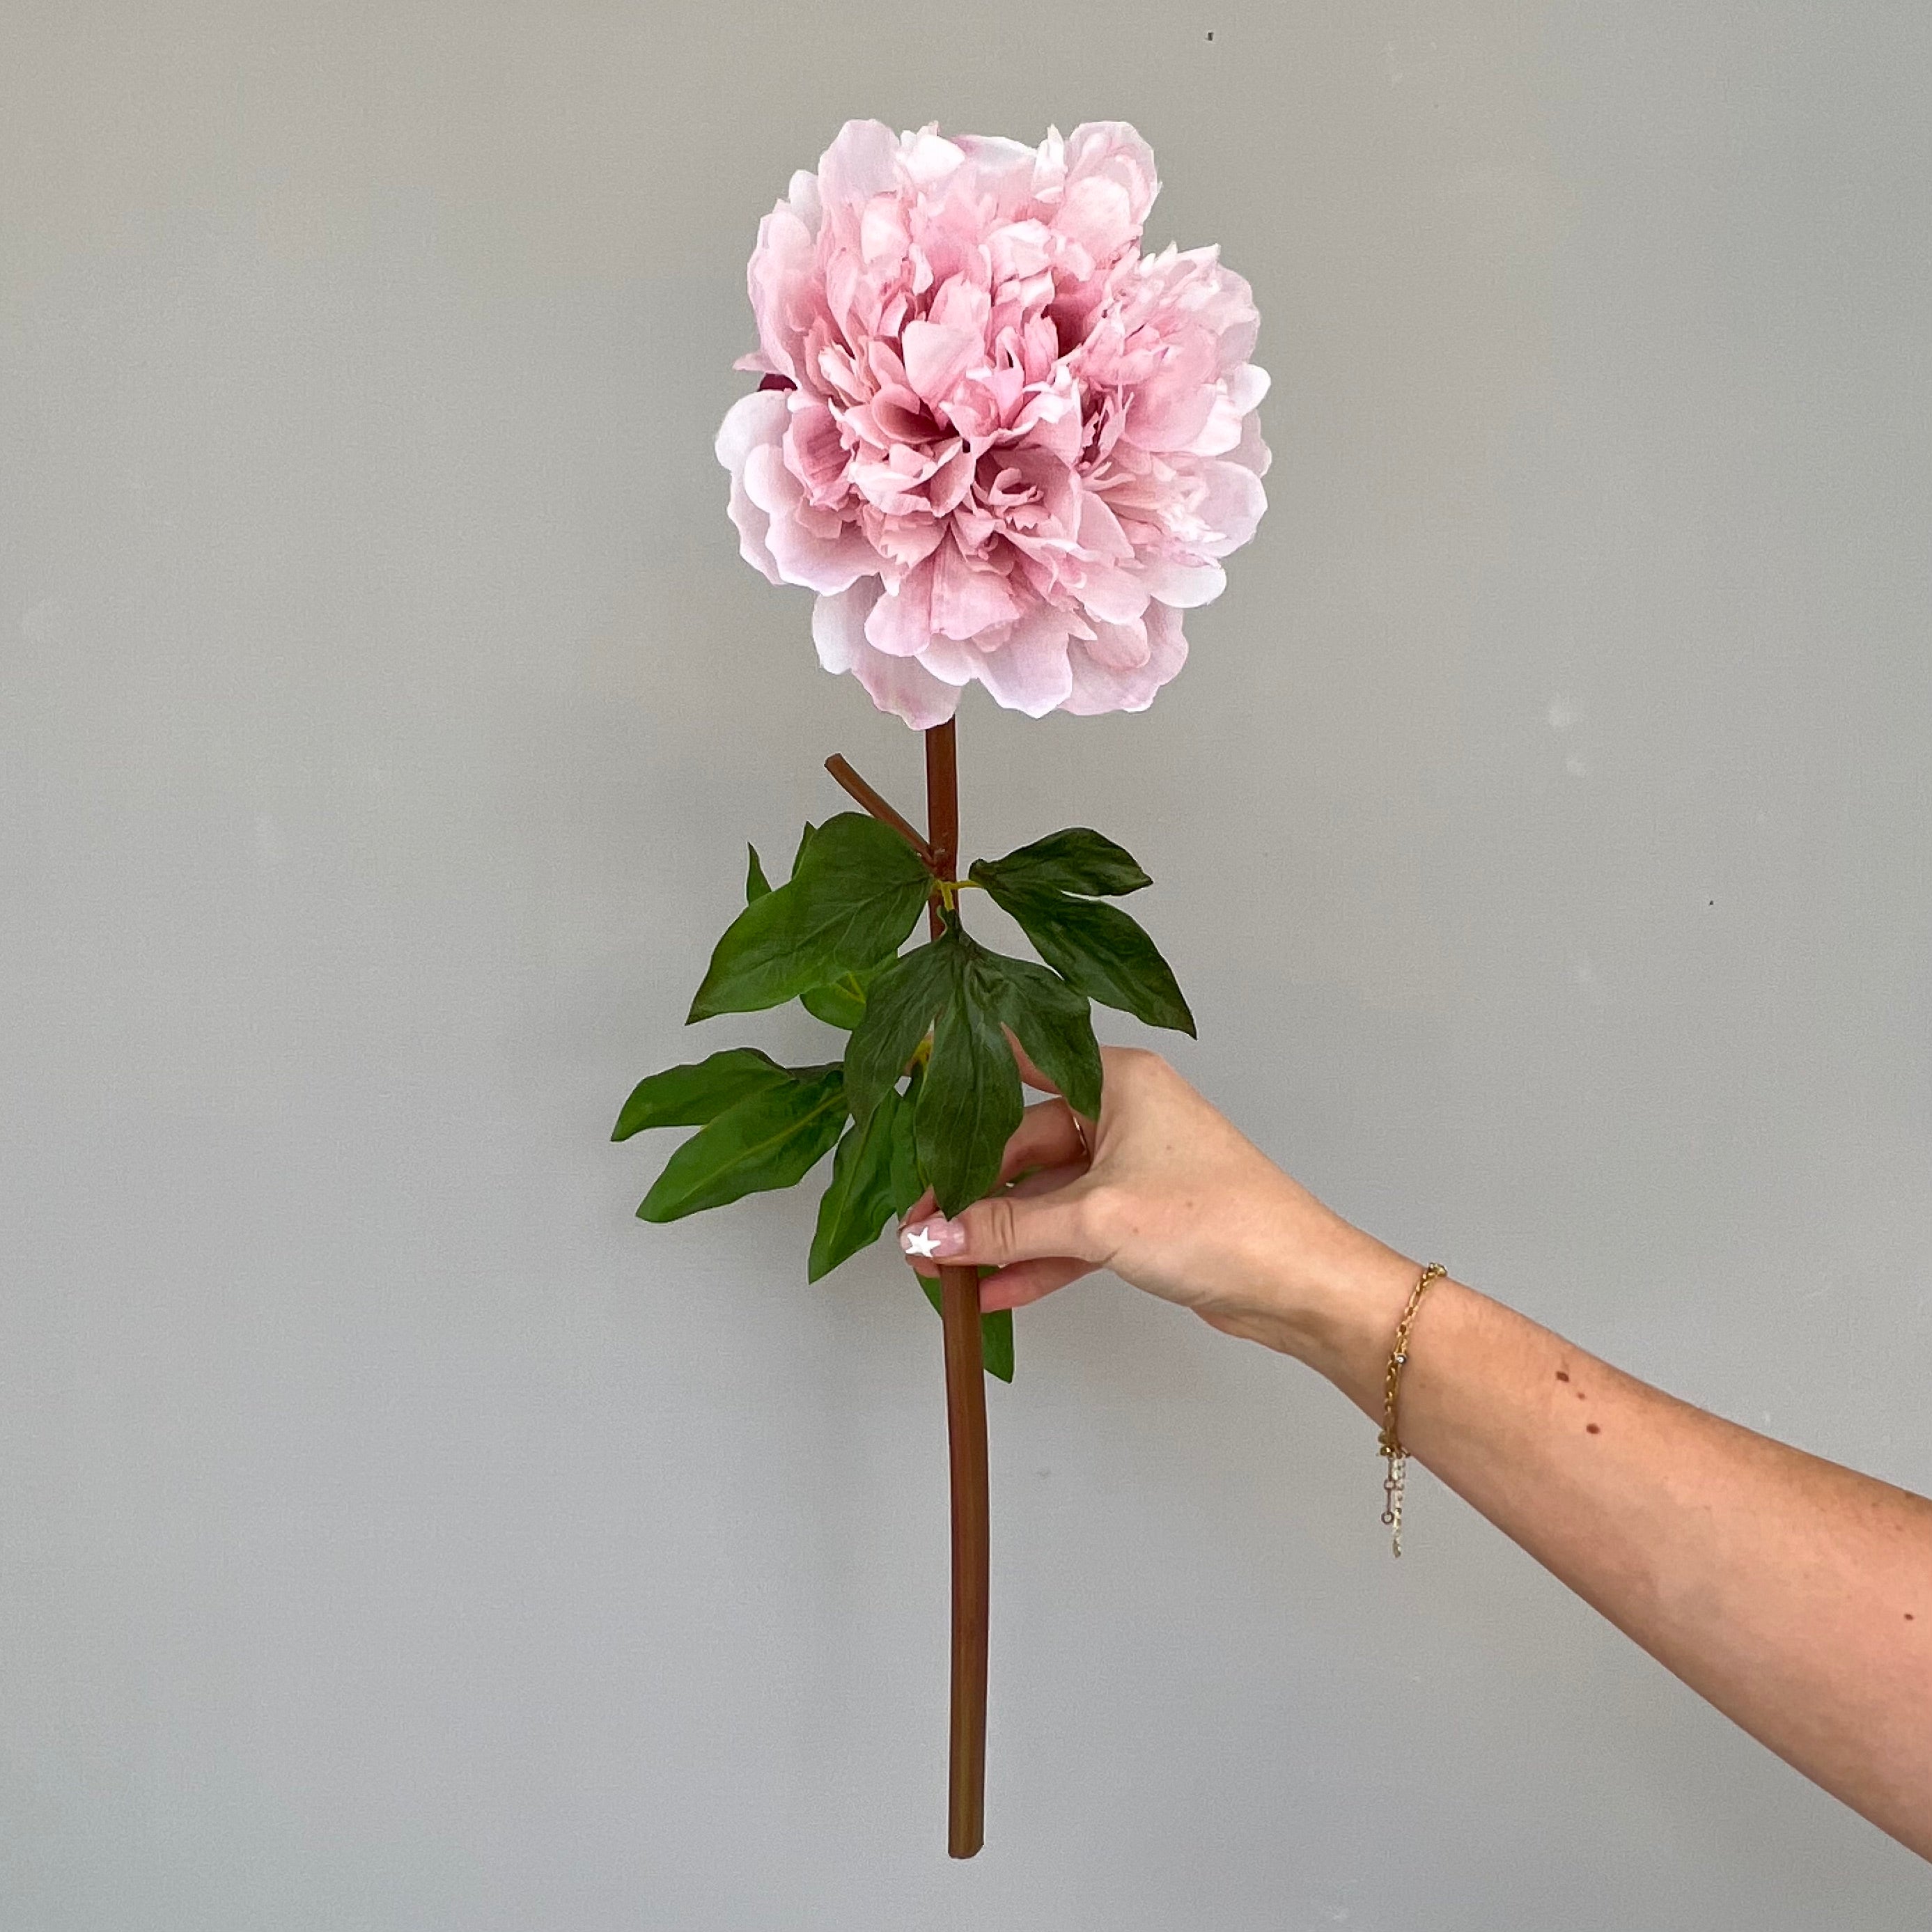 Luxury Lifelike Realistic Artificial Fabric Silk Luxury Large Open Peony Flower Stem Bouquets with Foliage Buy Online from The Faux Flower Company